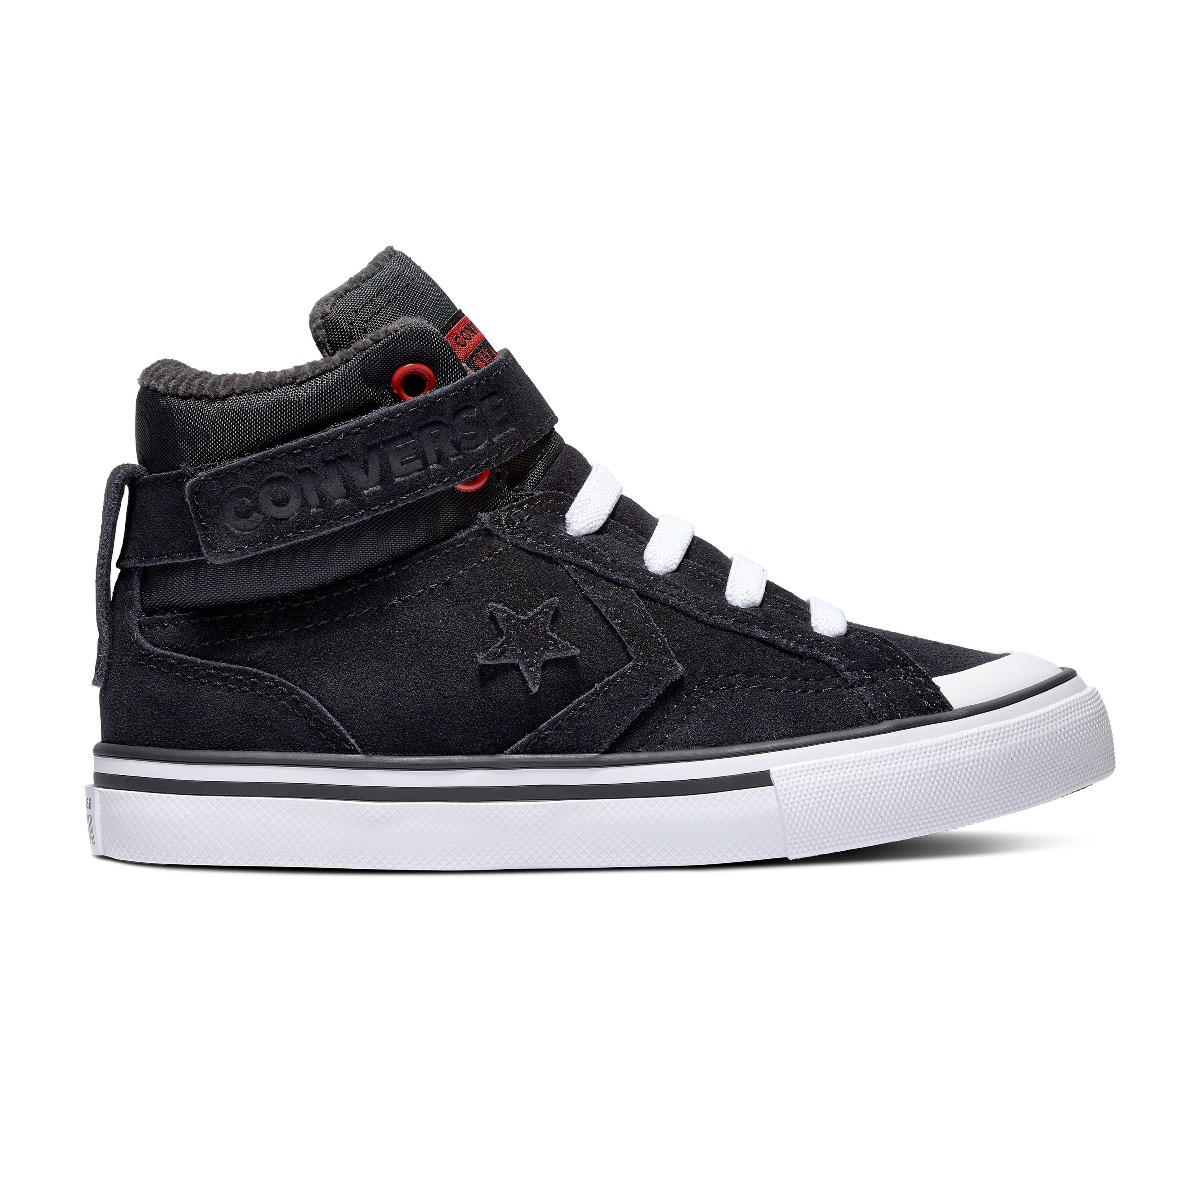 Converse All Stars Space Ride 665277C Zwart / Wit / Rood maat